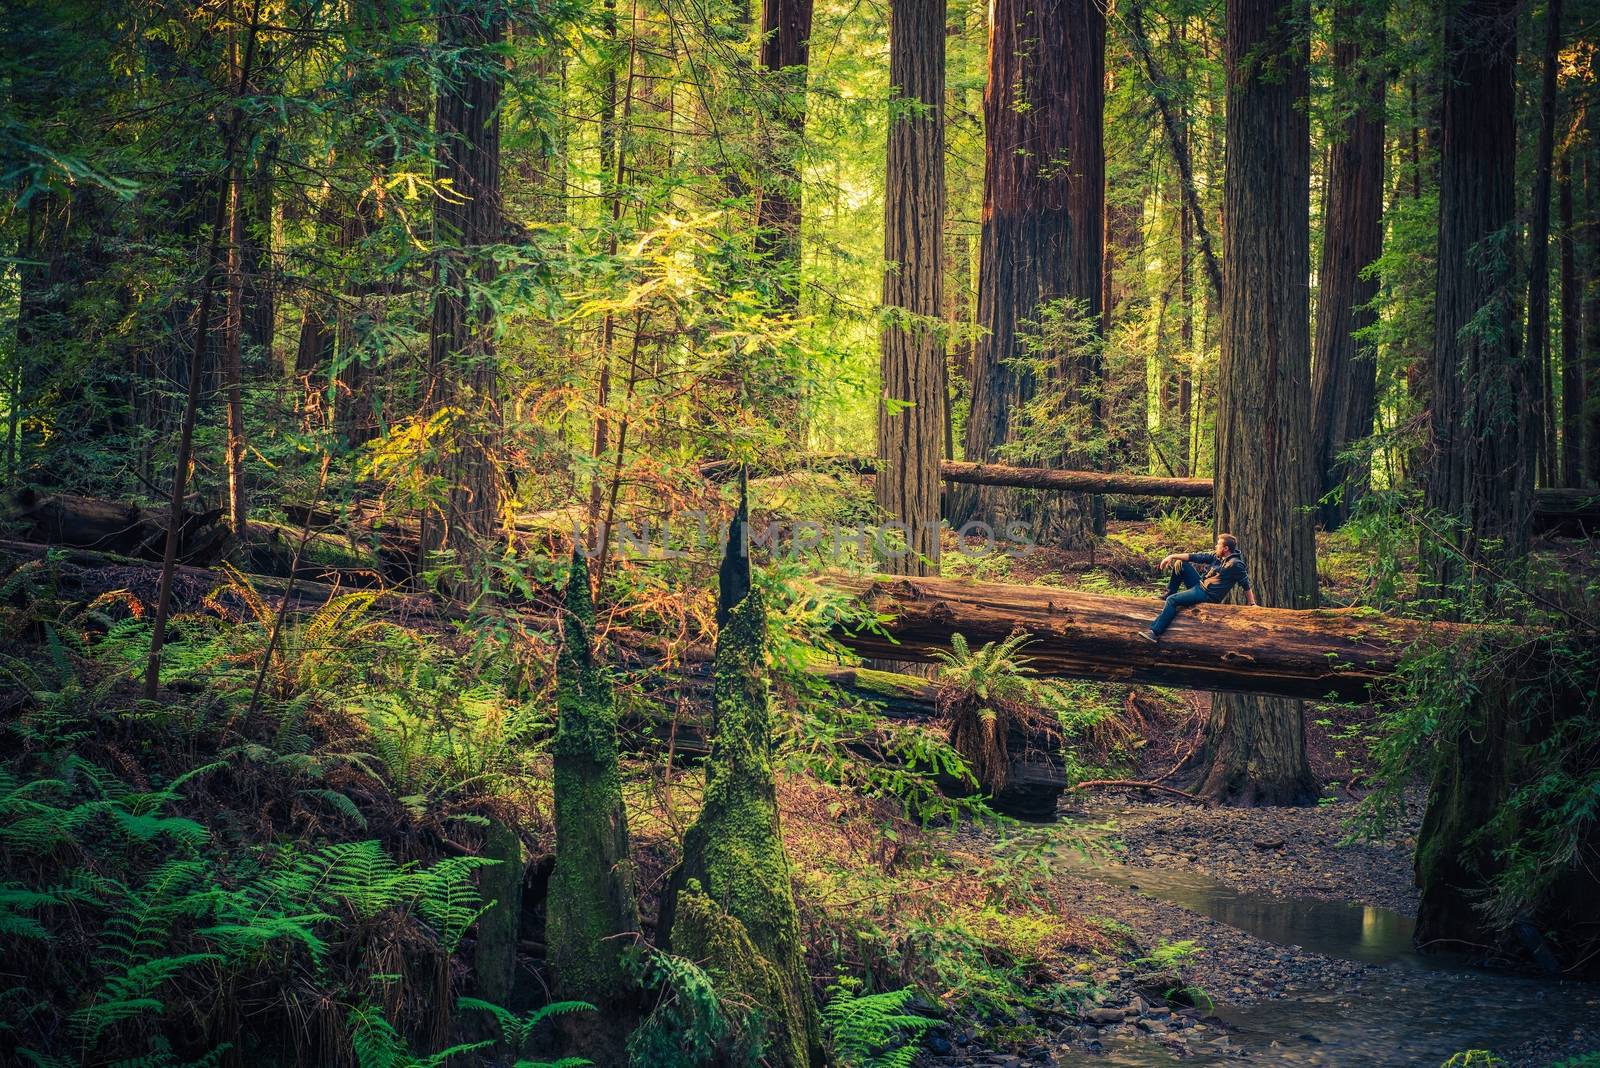 Resting on the Redwood by welcomia